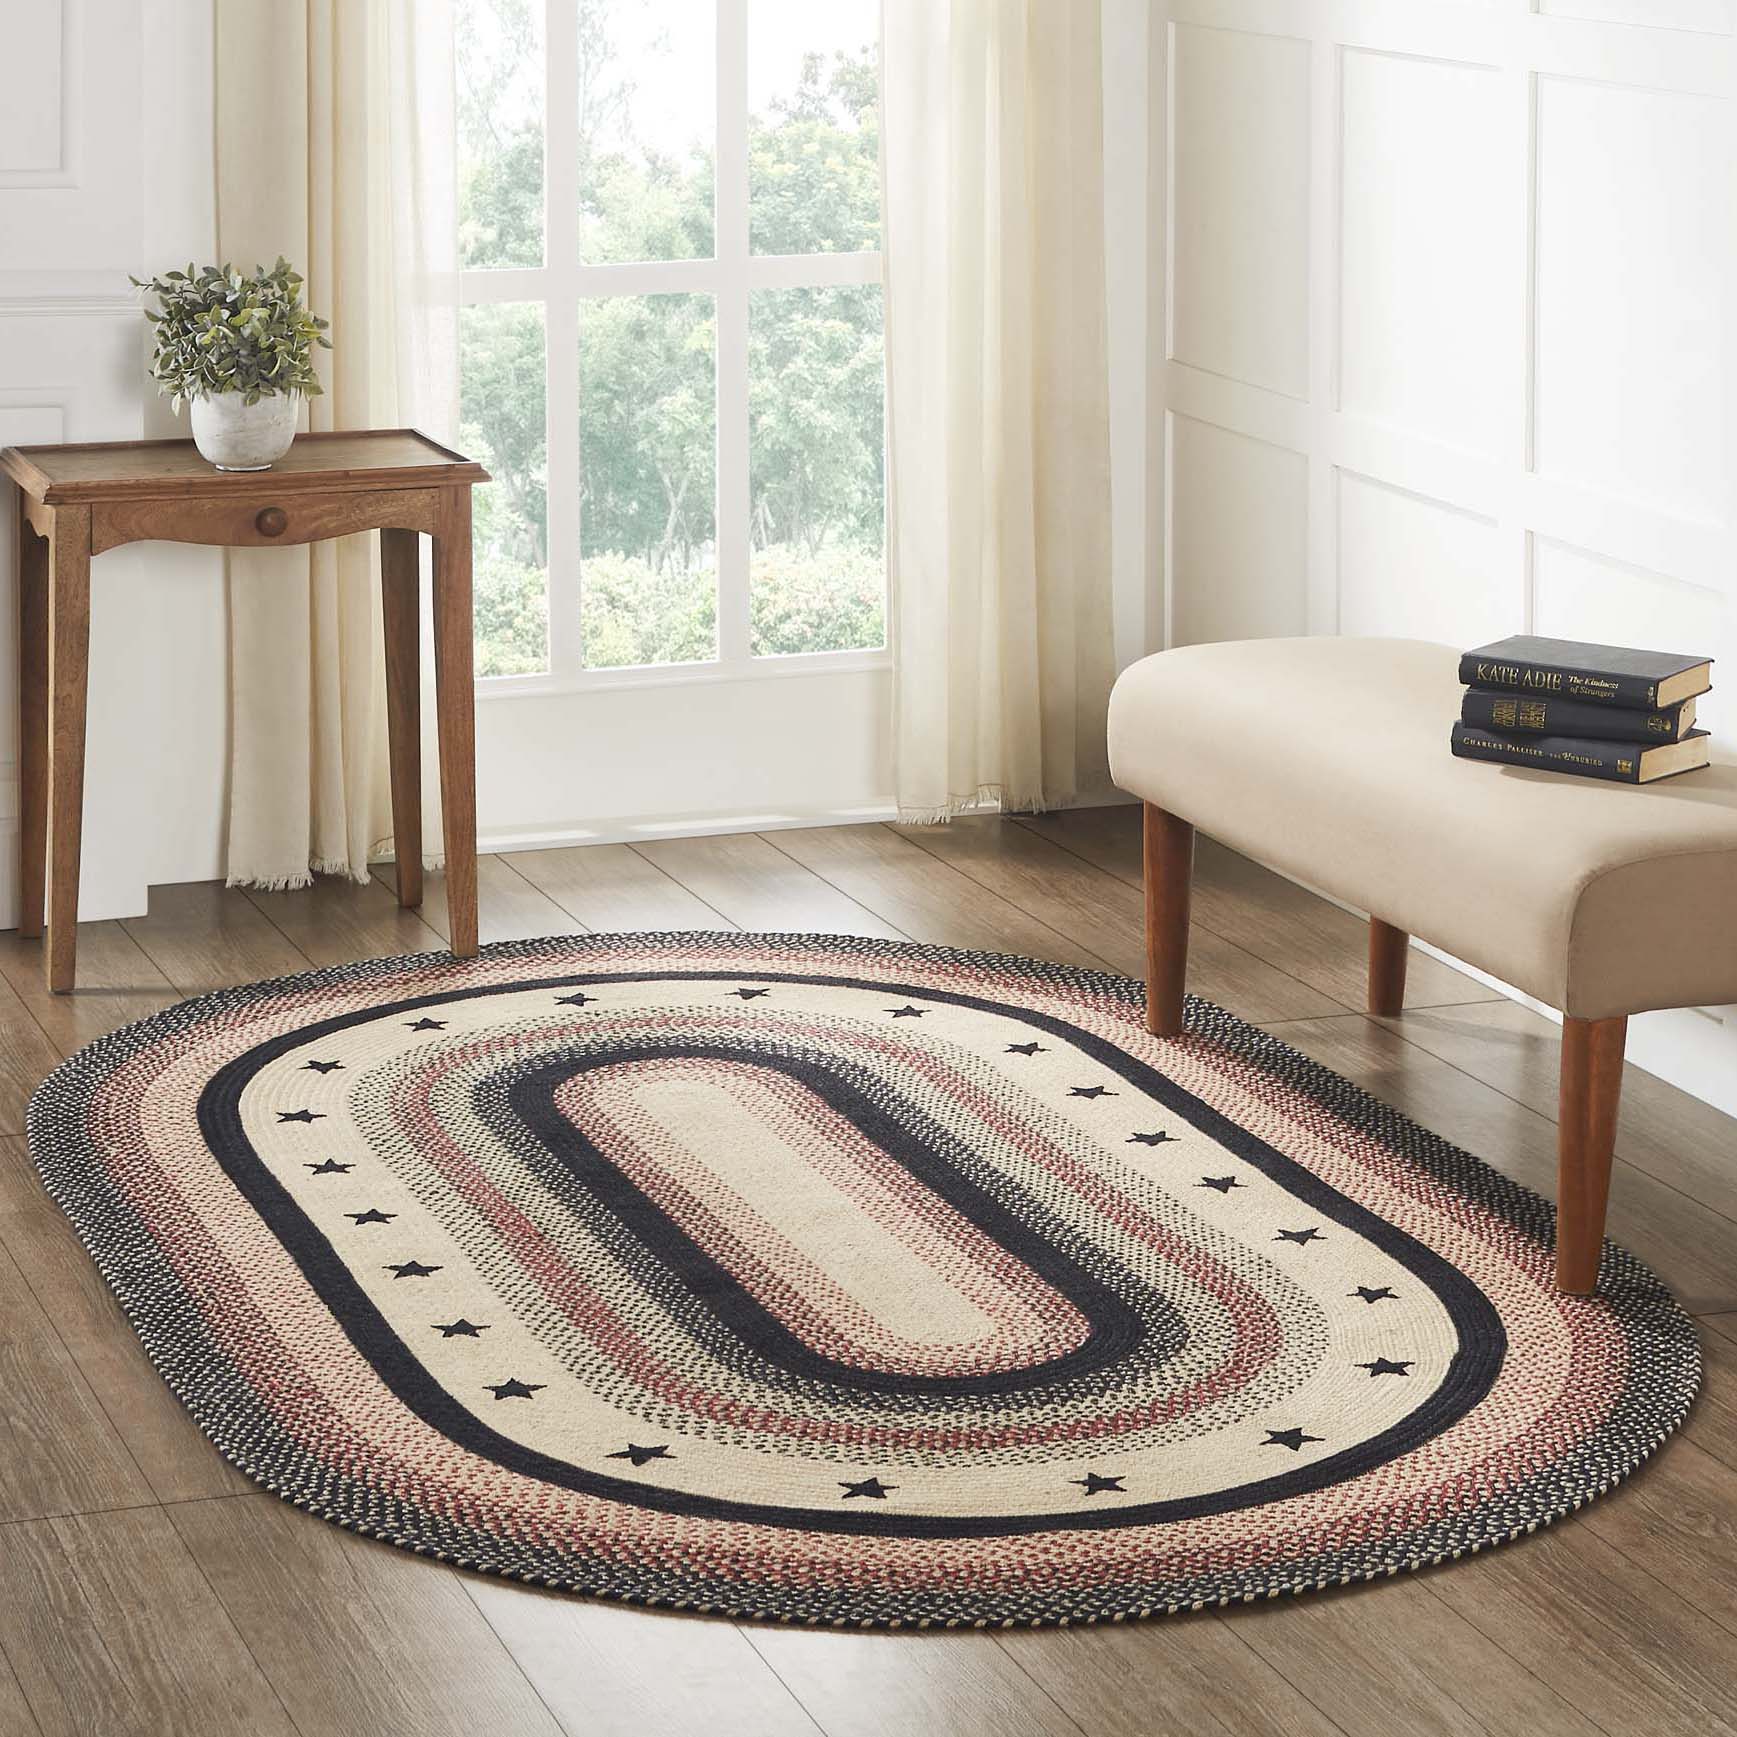 https://www.langegeneralstore.com/cdn/shop/files/Colonial-Star-Collection-Braided-Rugs-Oval-Oval-60-x-96.jpg?v=1684673157